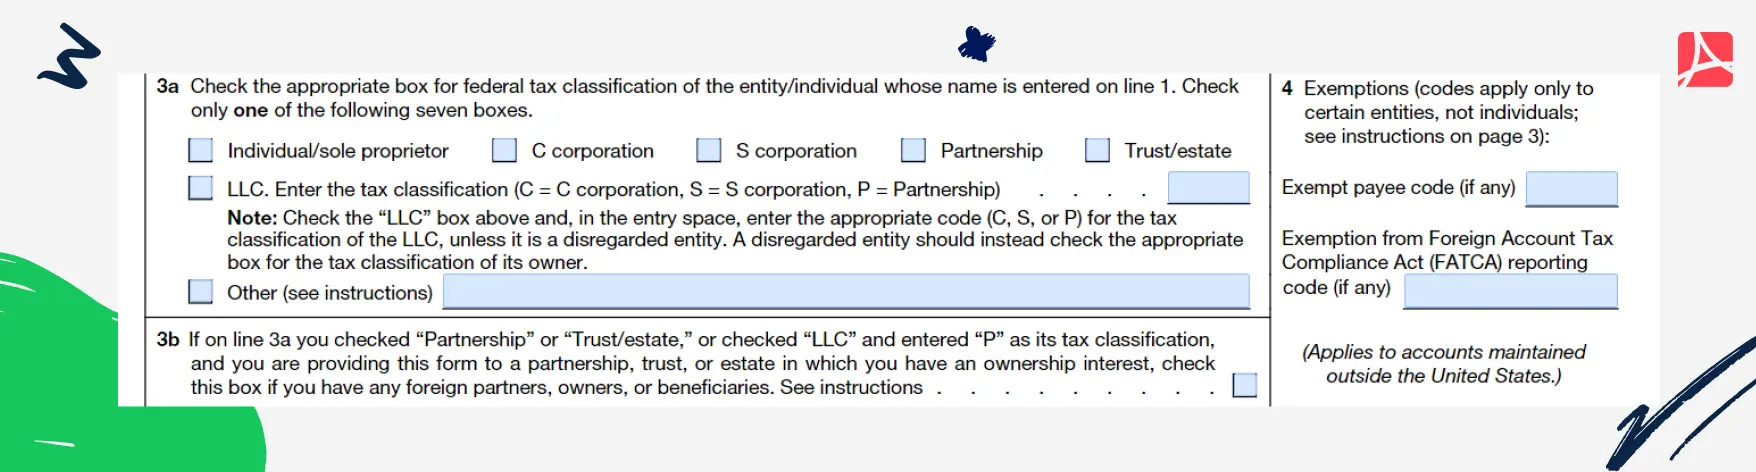 Section 3 and 4 of Form W-9